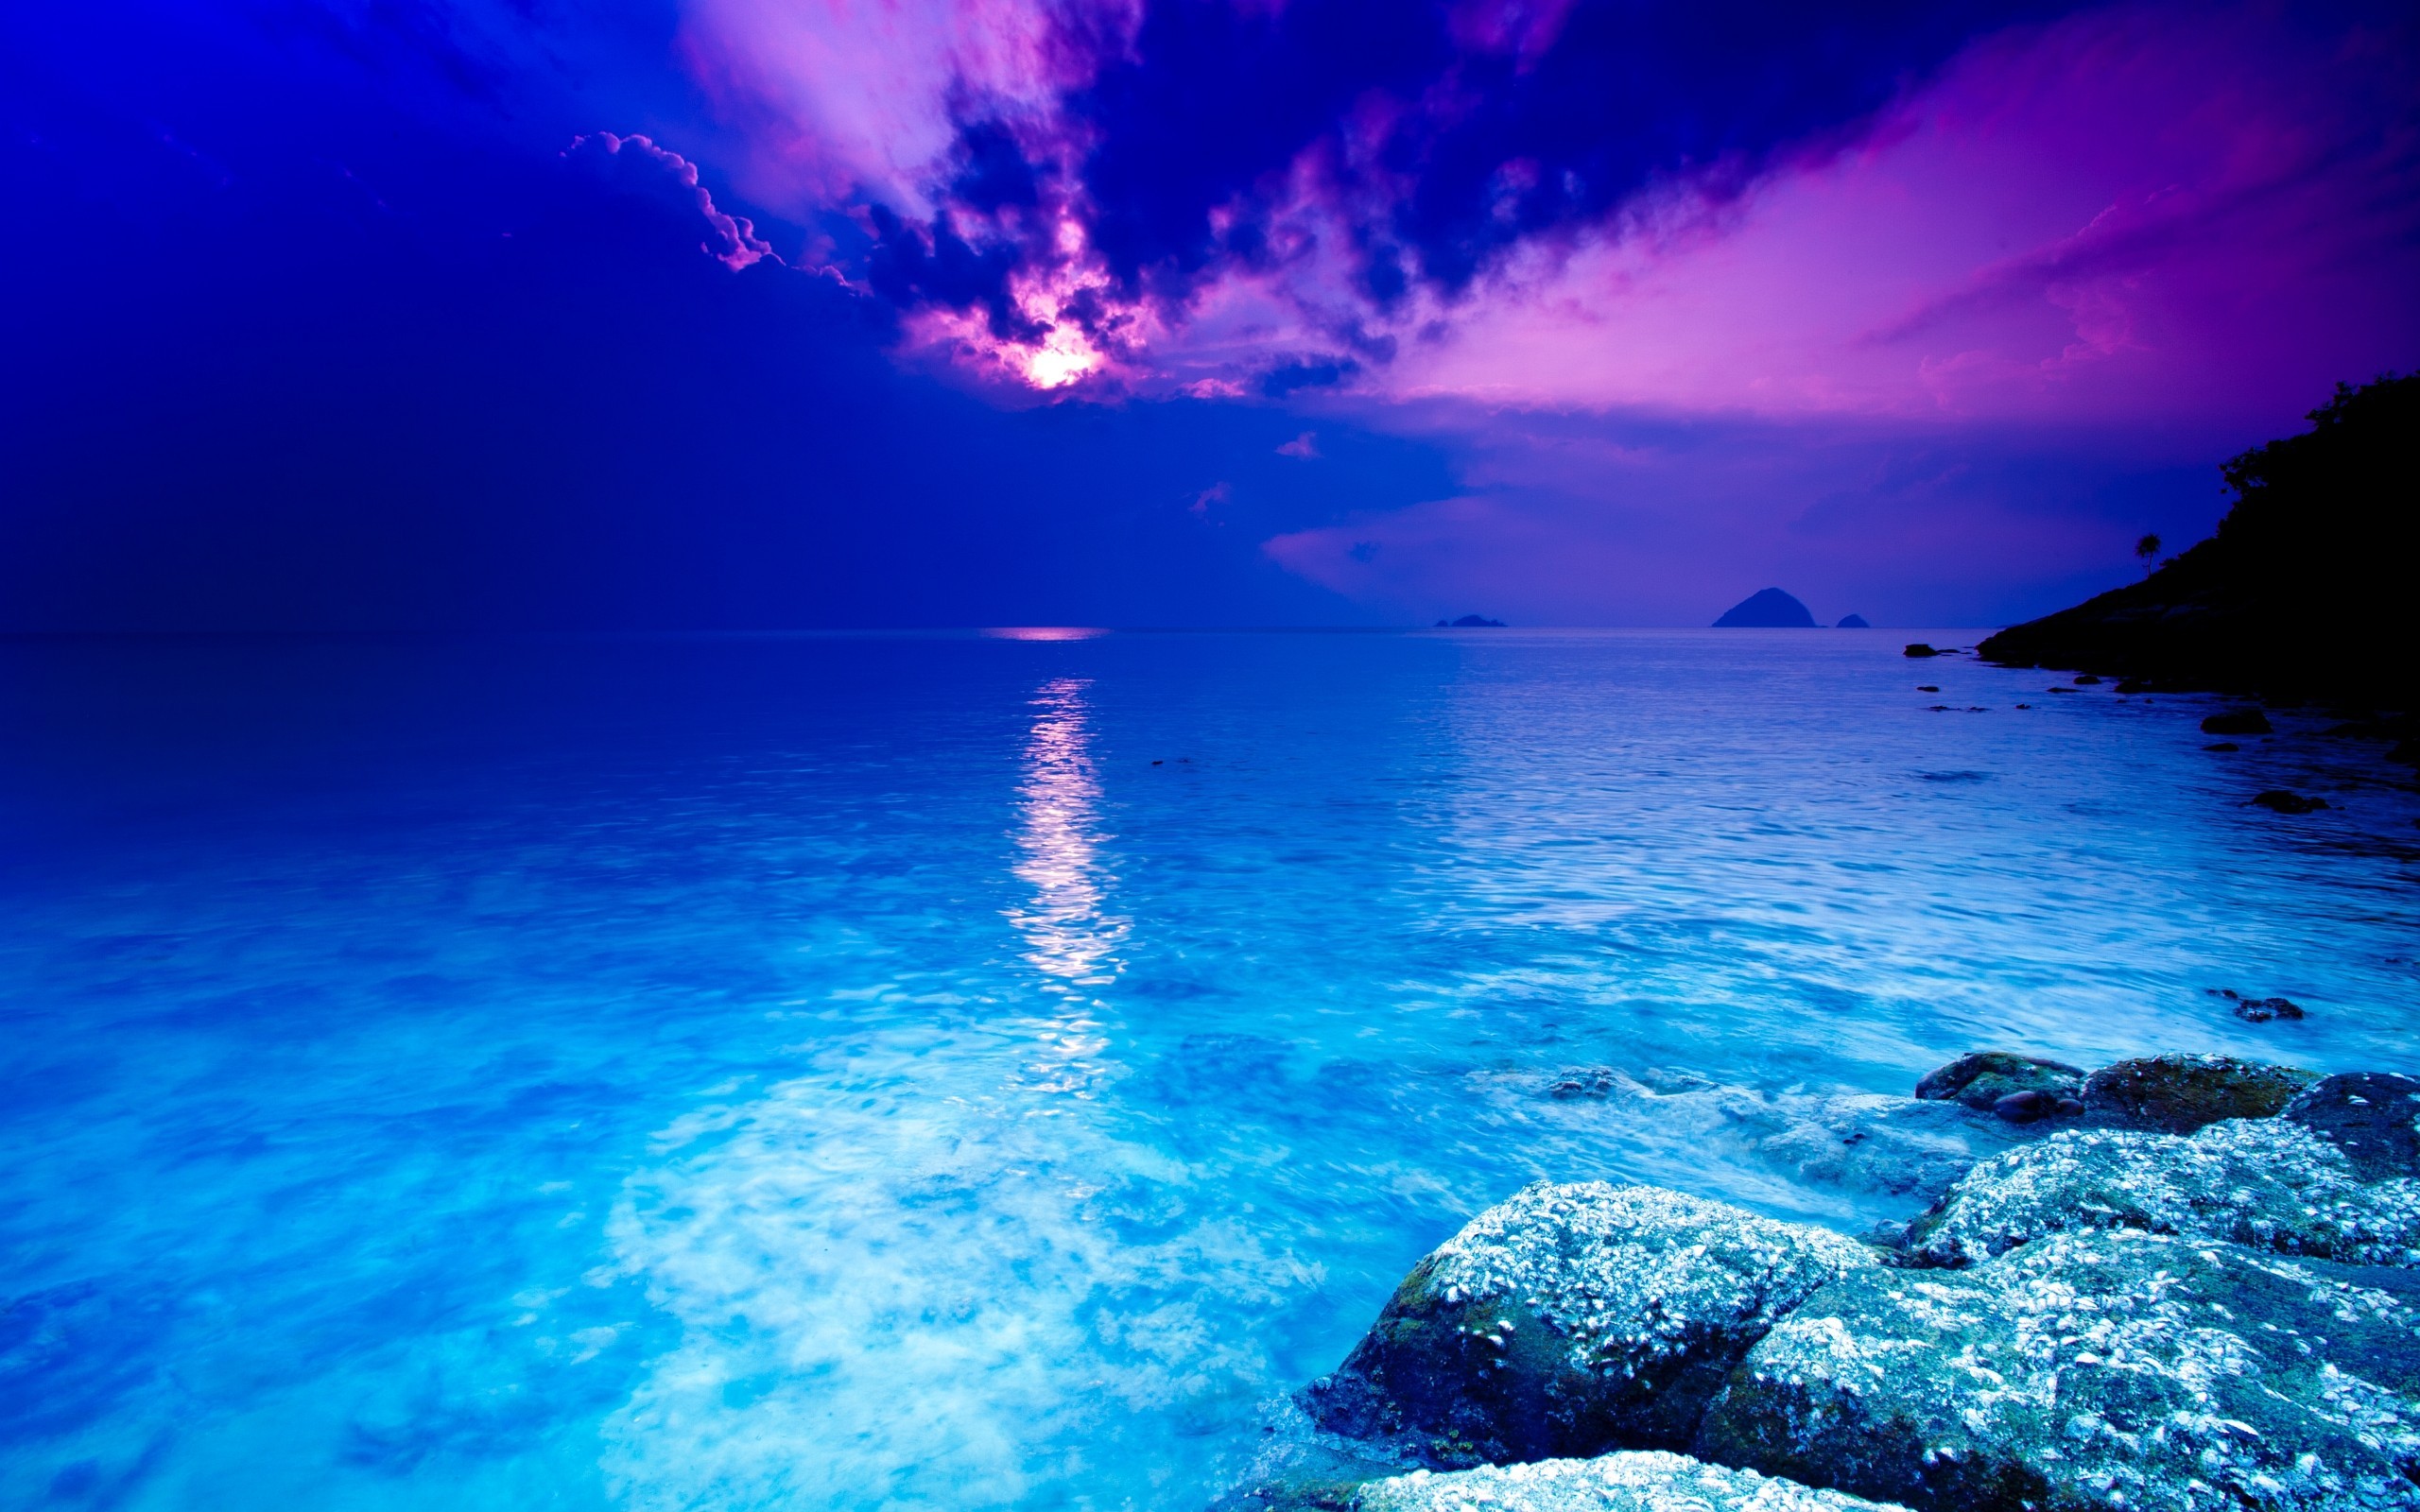 General 2560x1600 nature landscape water sea clouds low light